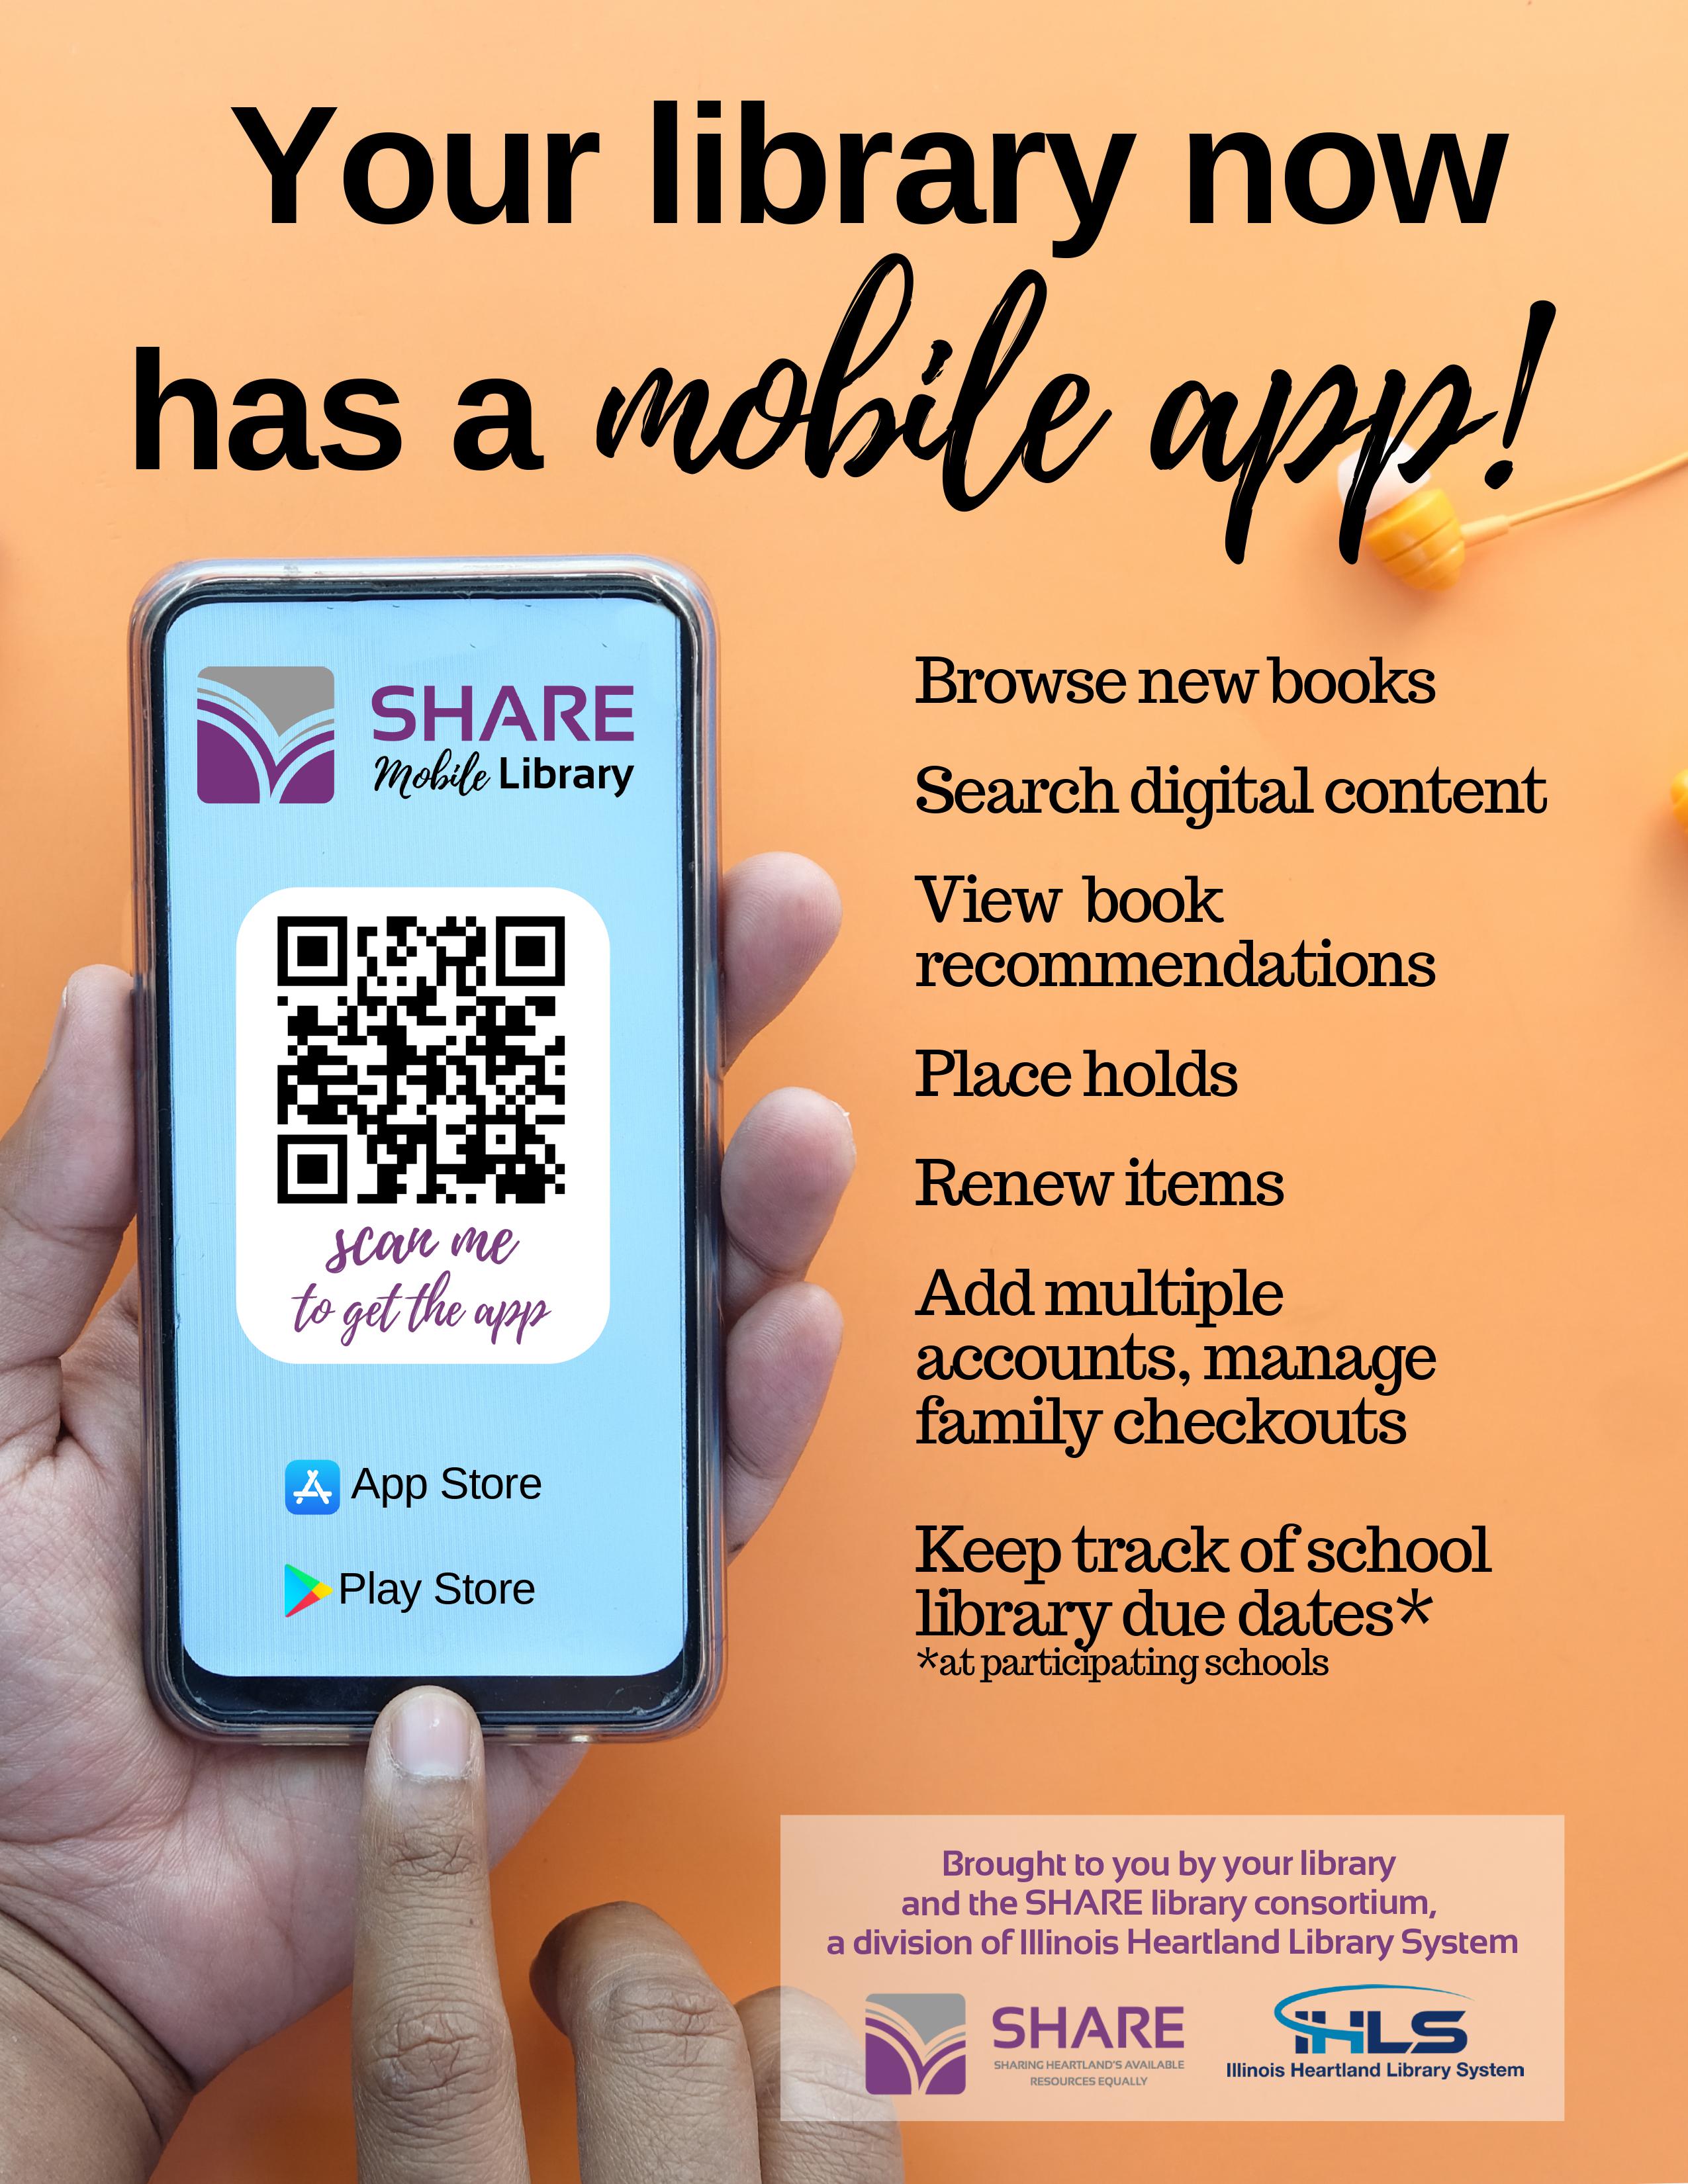 Shiloh library has Share mobile app